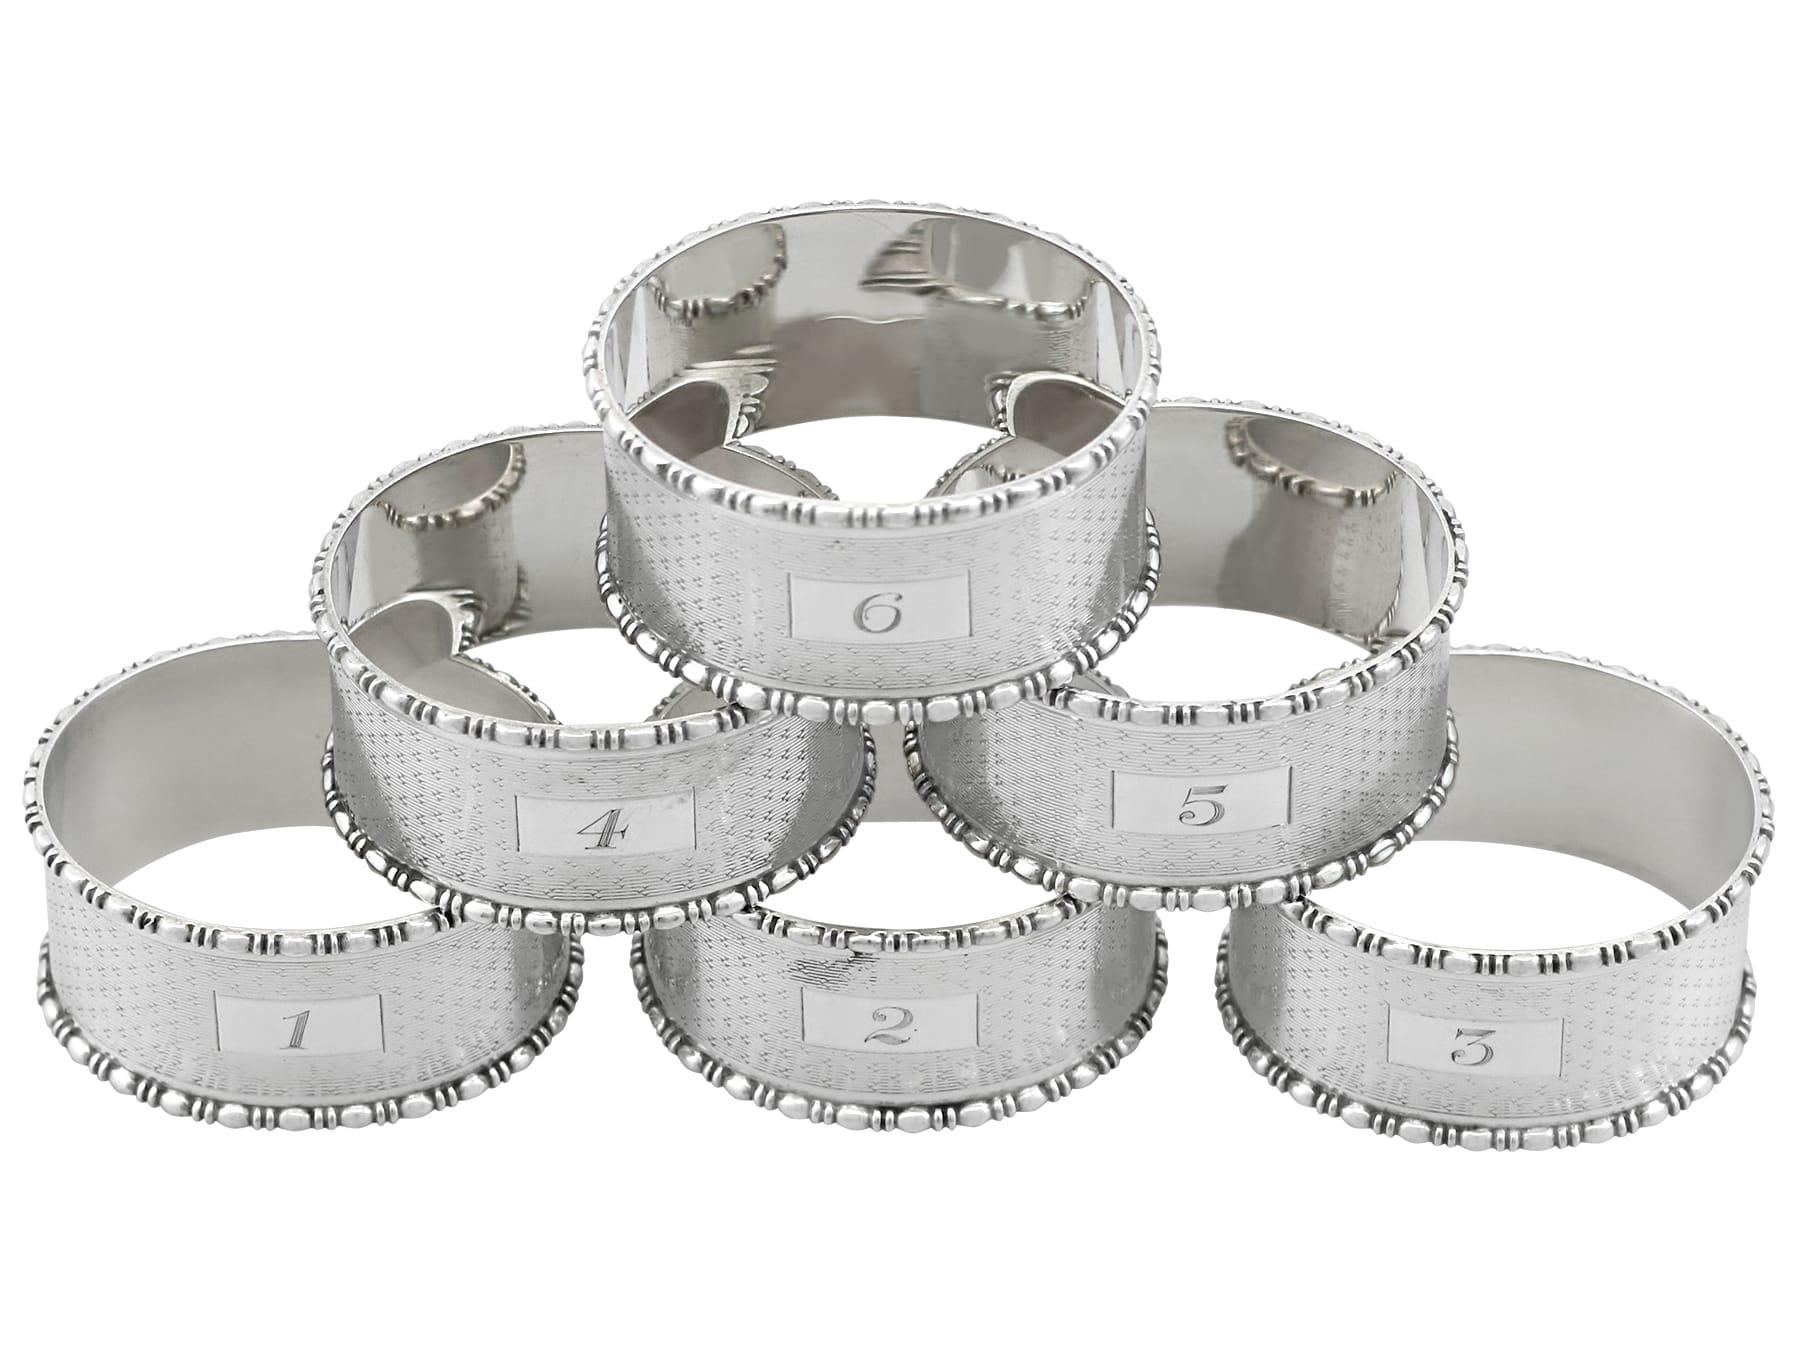 A fine and impressive set of six antique George V sterling silver numbered napkin rings; an addition to our dining silverware collection.

This fine and impressive set of antique George V silver napkin rings consists of six napkin rings, each with